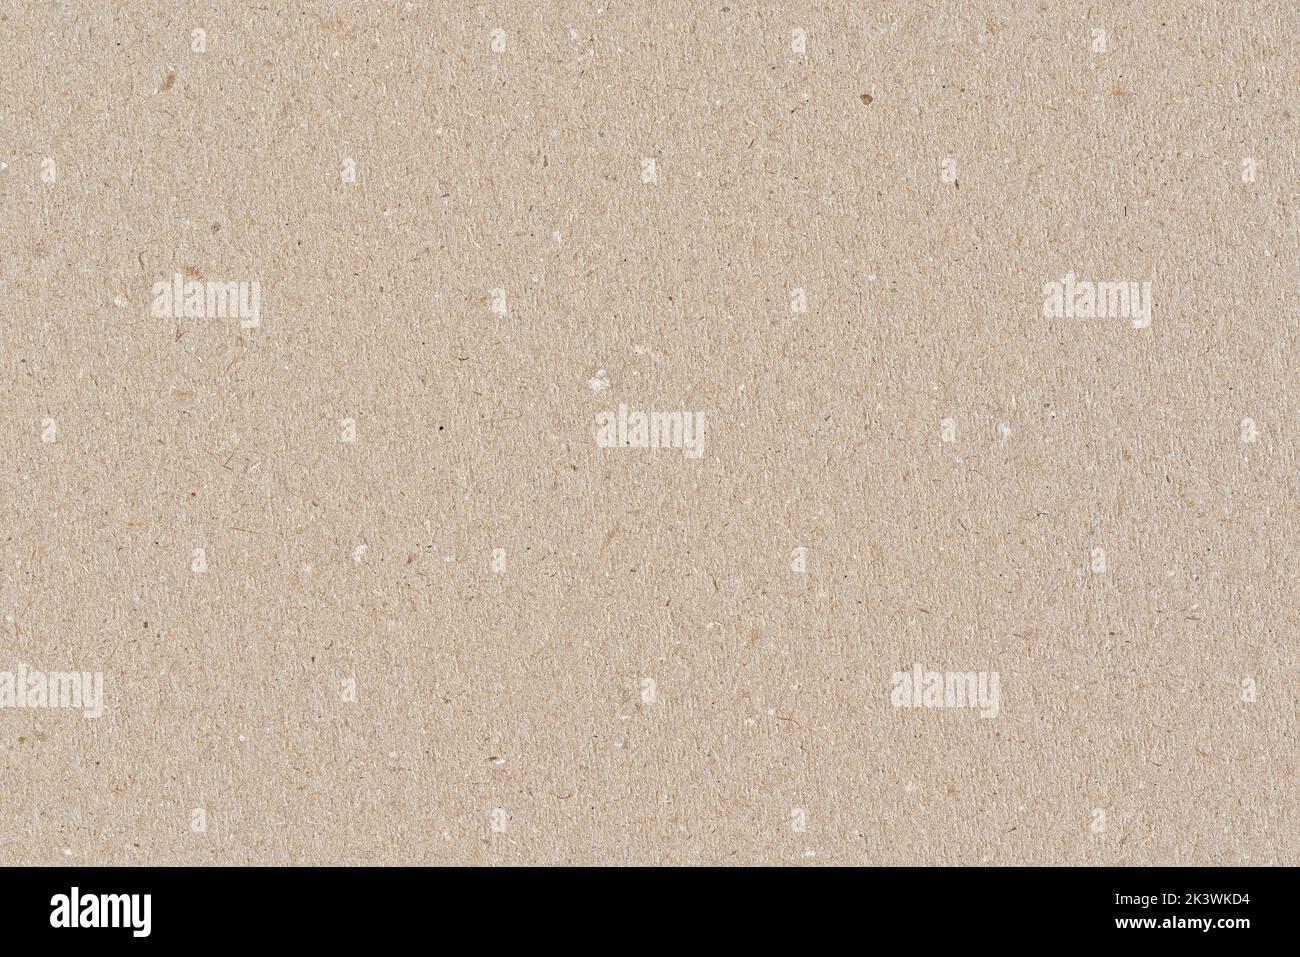 Beige color cardboard recycled paper, tileable texture, image width 20cm Stock Photo